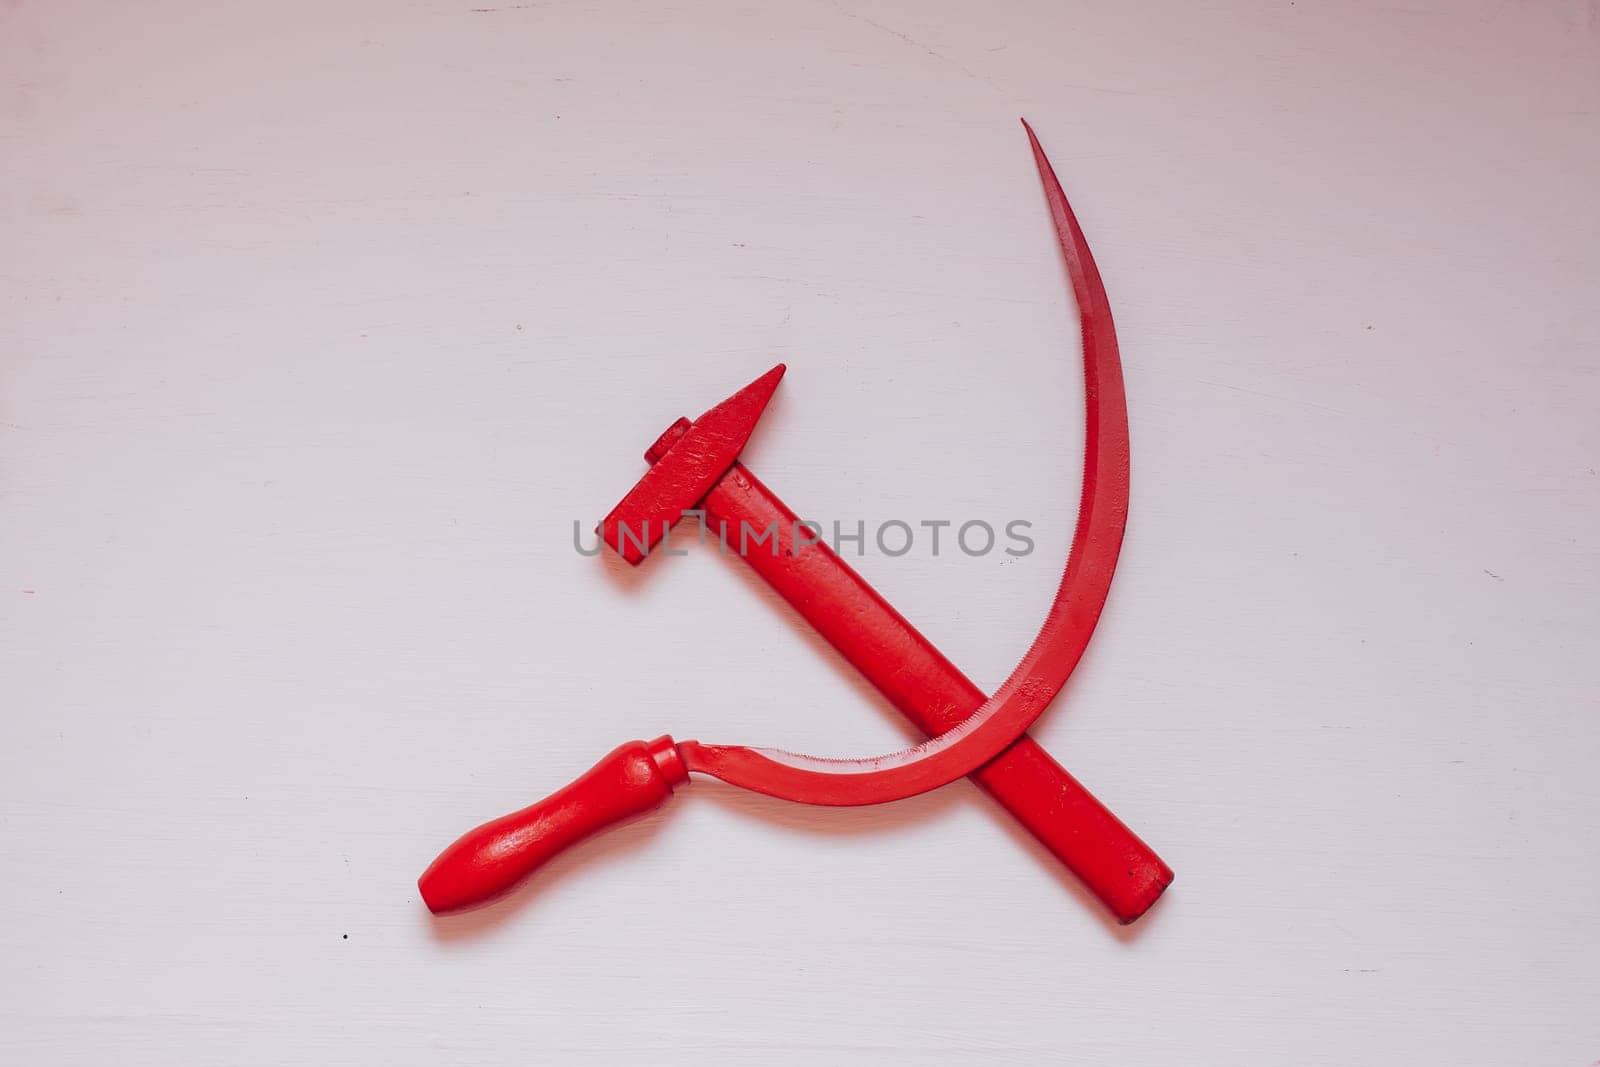 red sickle and hammer symbol of communism in the Soviet Union history of Russia by Simakov